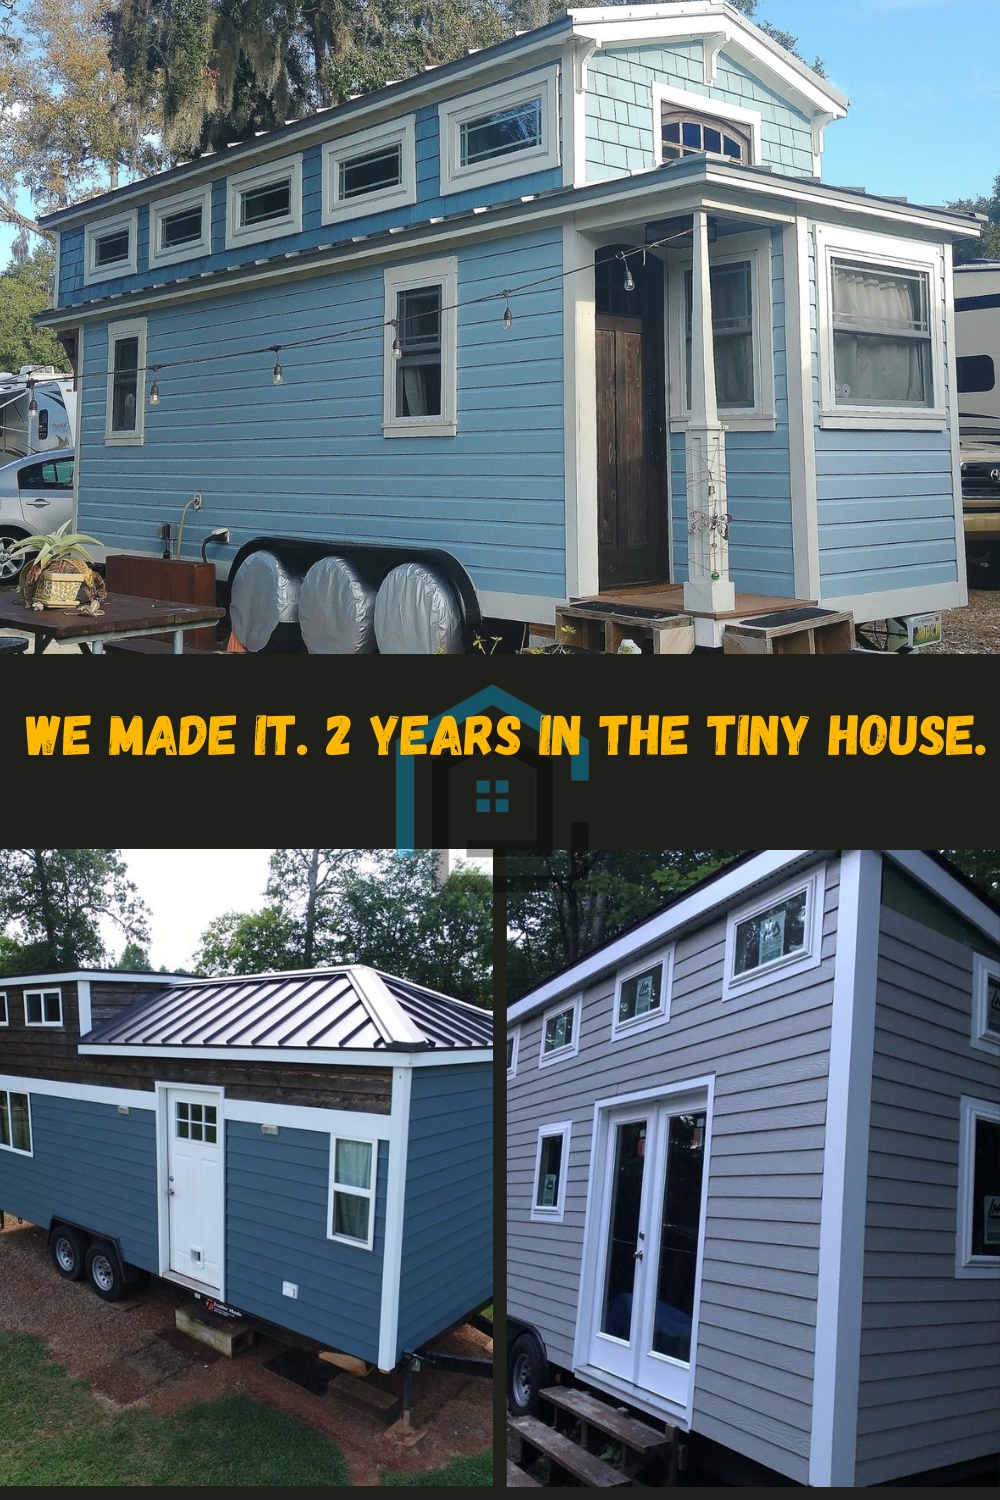 Well, we made it. 2 years in the tiny house. I wanted to give a quick update on us and all things Tiffany. pin